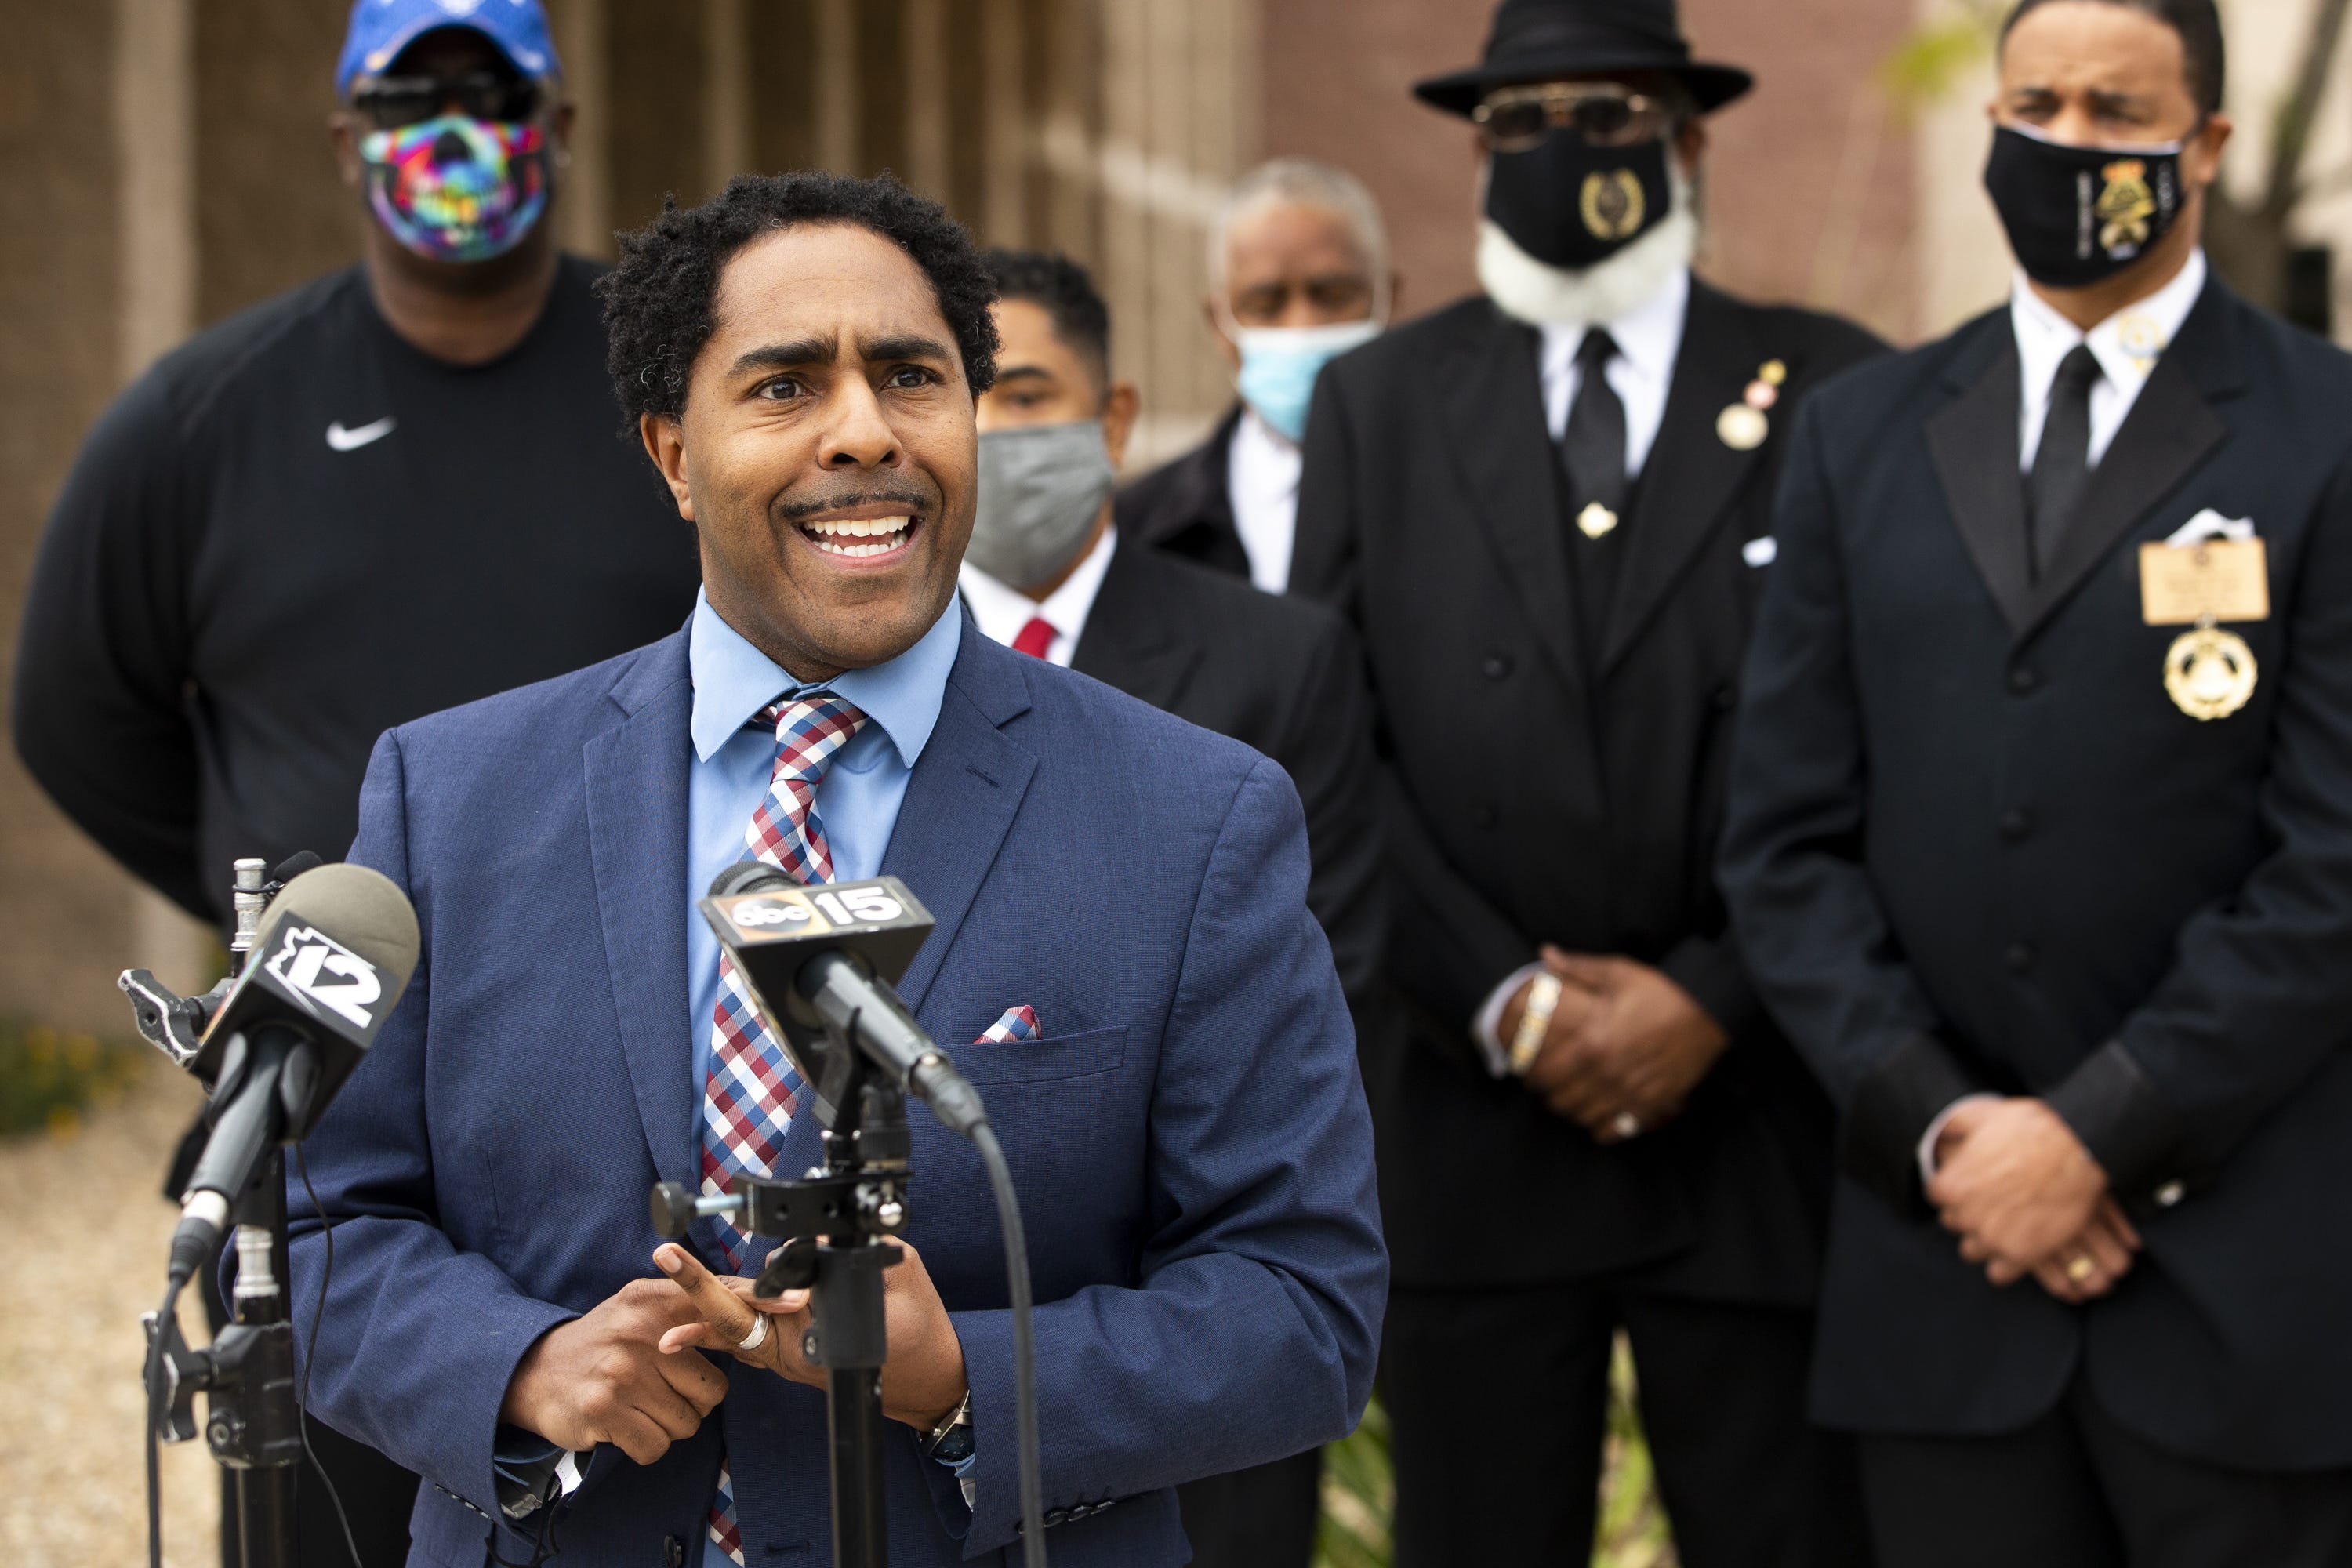 Attorney Benjamin Taylor speaks at a press conference on behalf of his client, Ricky Barnes, outside Avondale City Hall in Avondale on Feb. 1, 2021.